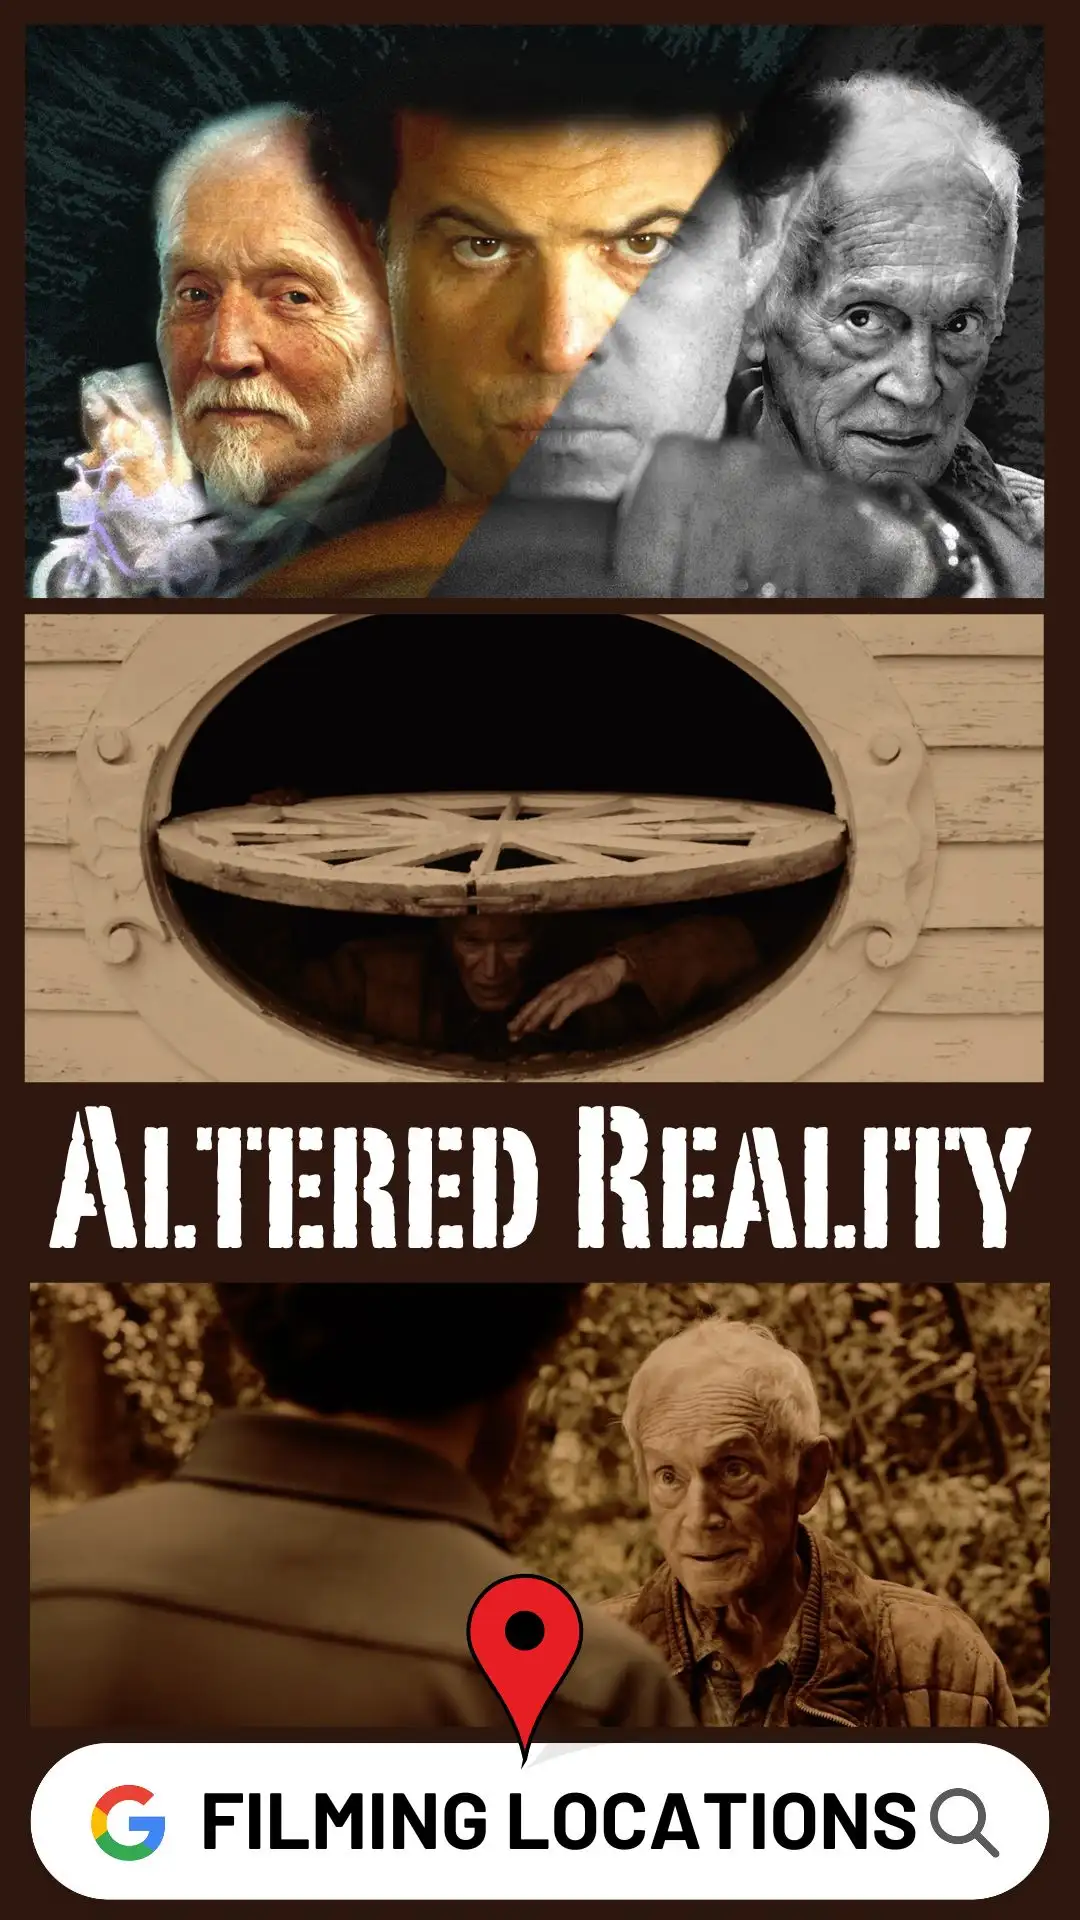 Altered Reality Filming Locations